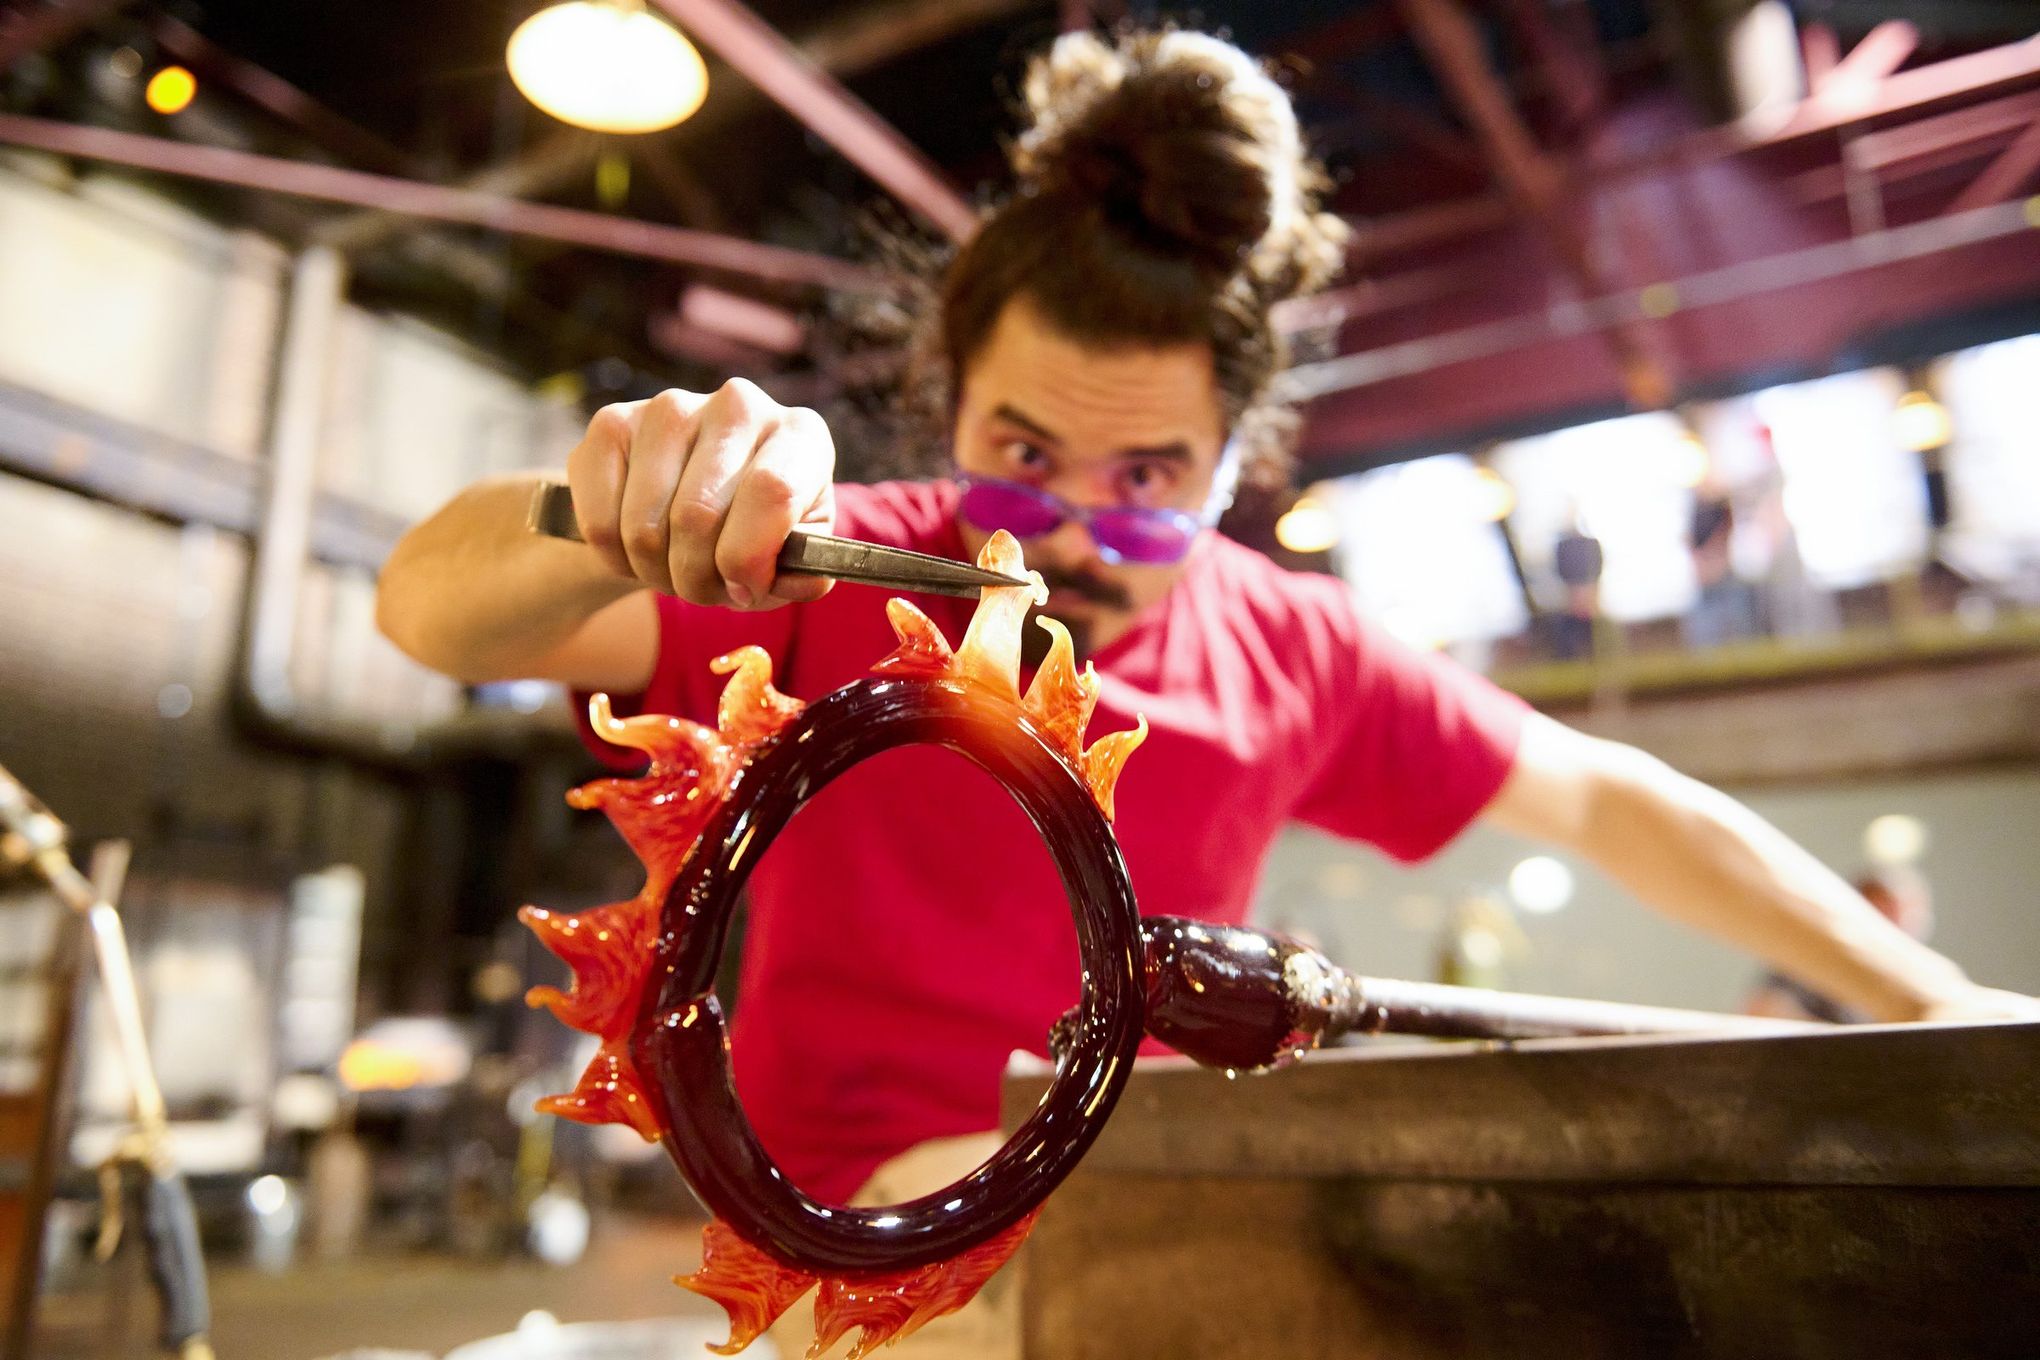 Netflix's 'Blown Away' breathes life into glassblowing